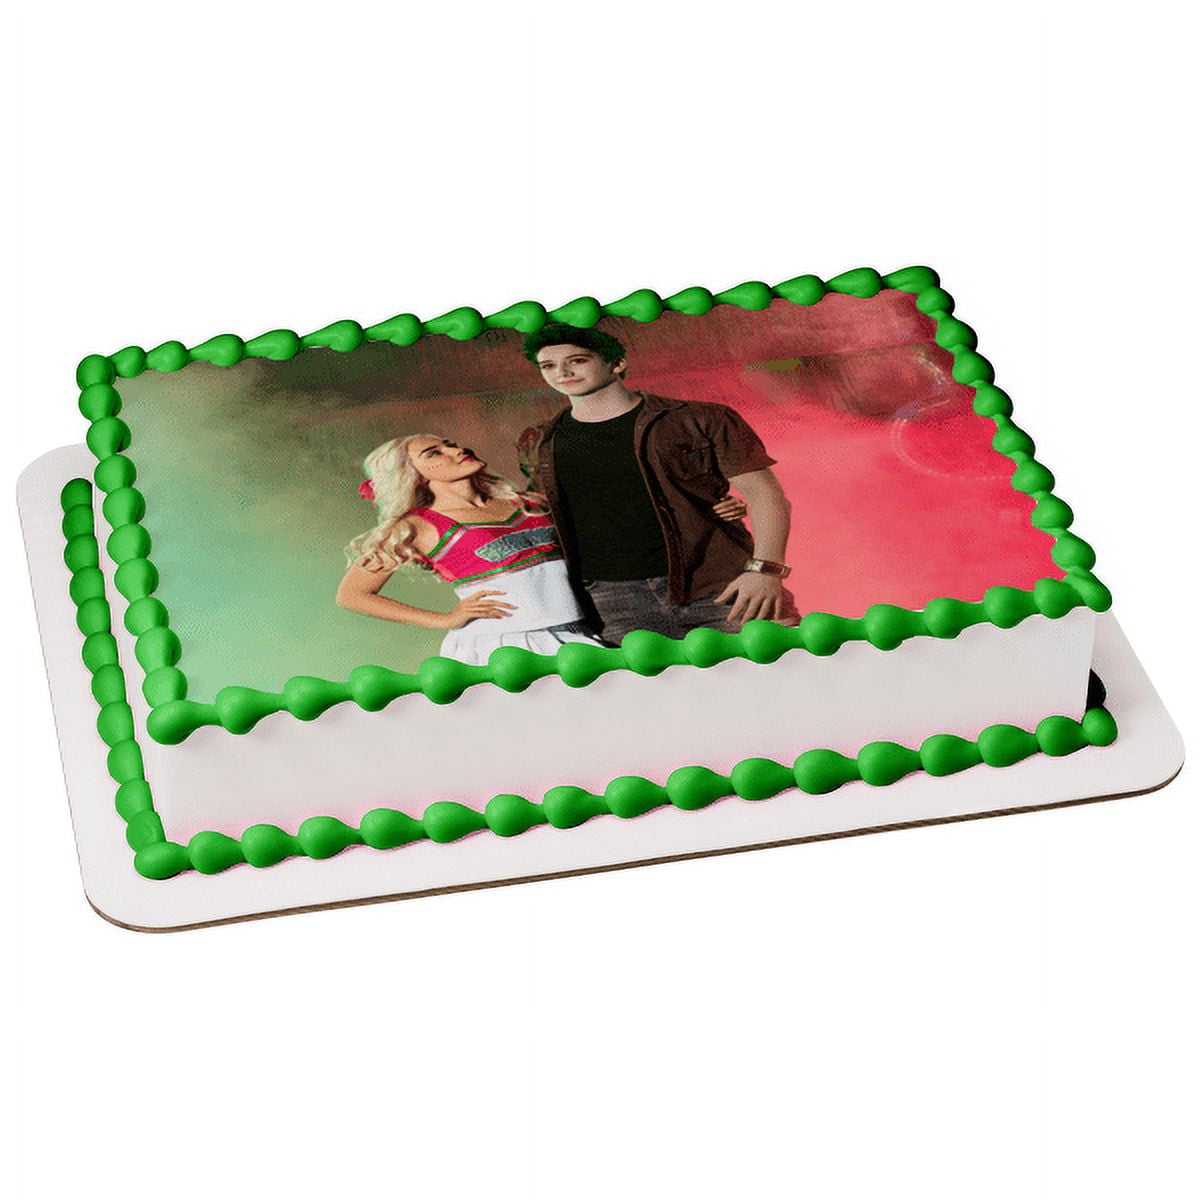 Disney Zombies 3 Zed and Addison Edible Cake Topper Image ABPID56489 